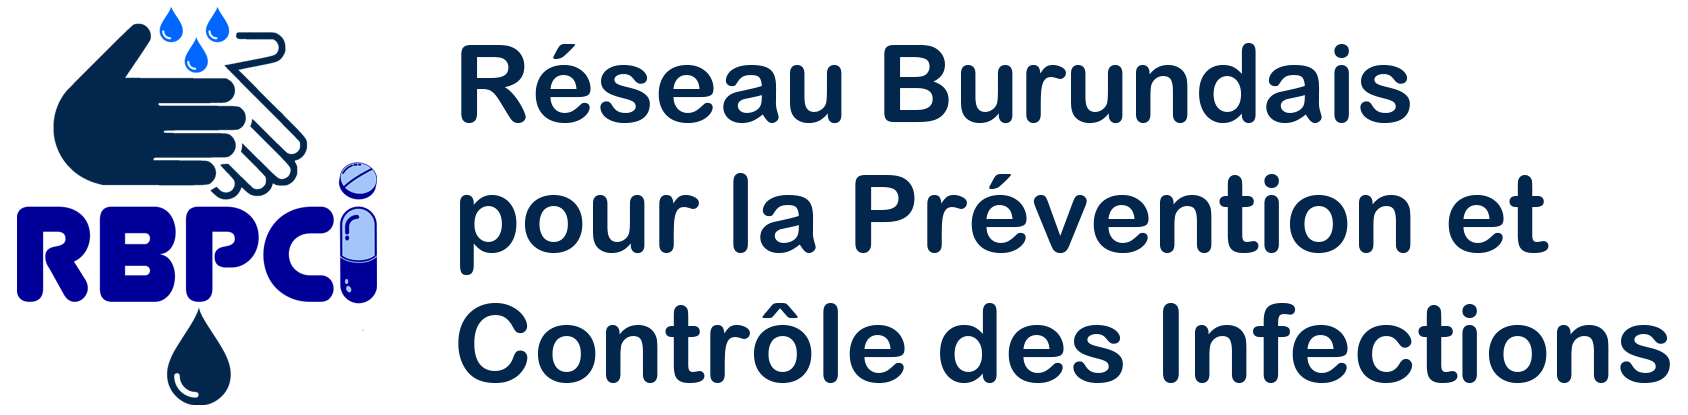 Burundian Network for Infection Prevention and Control